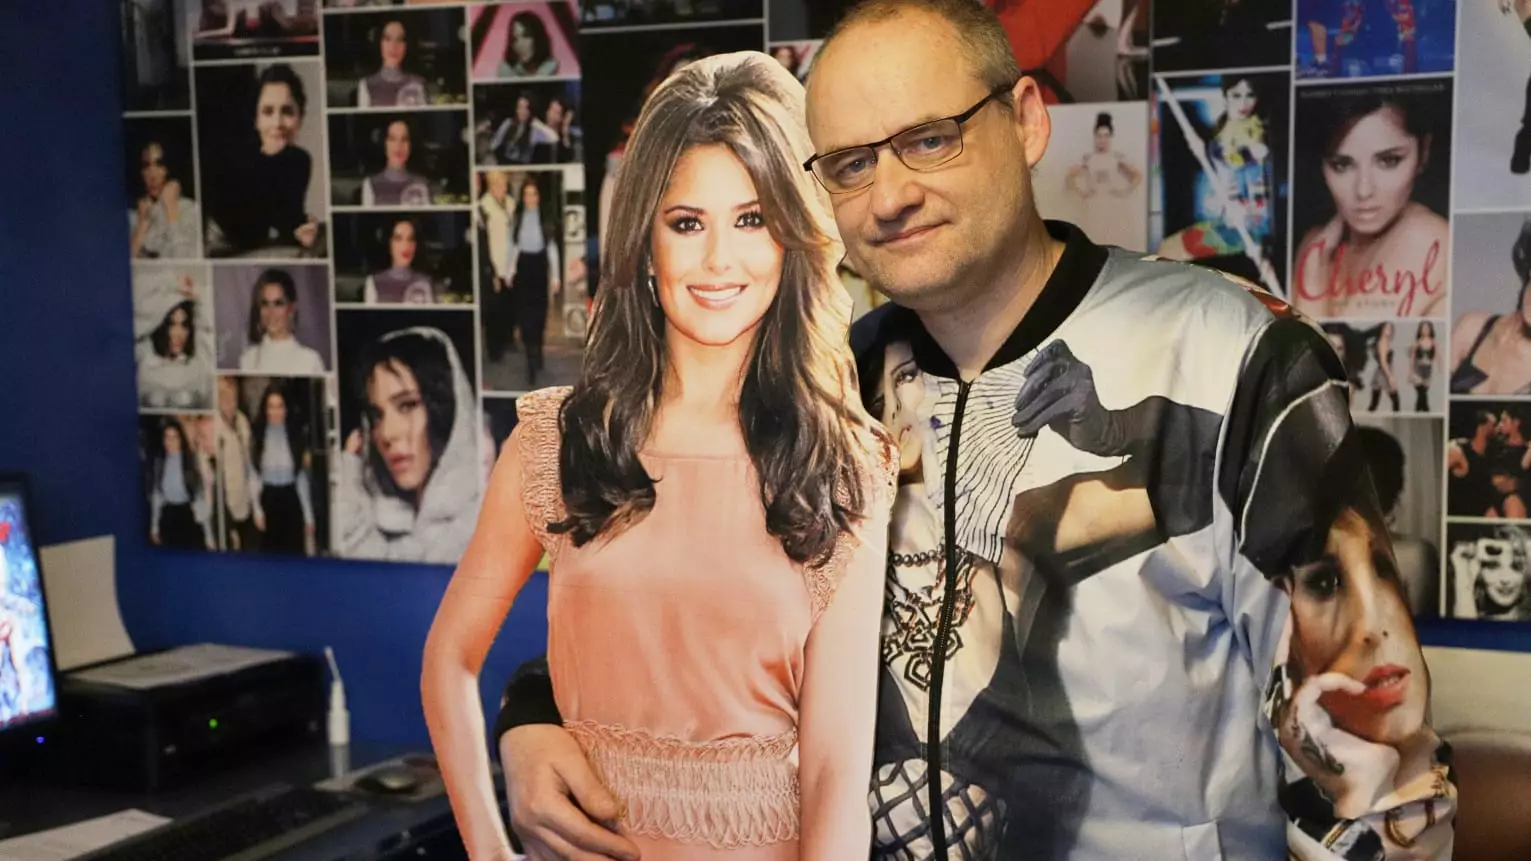 Cheryl Superfan Spends £7,000 Covering His Home With Her Face